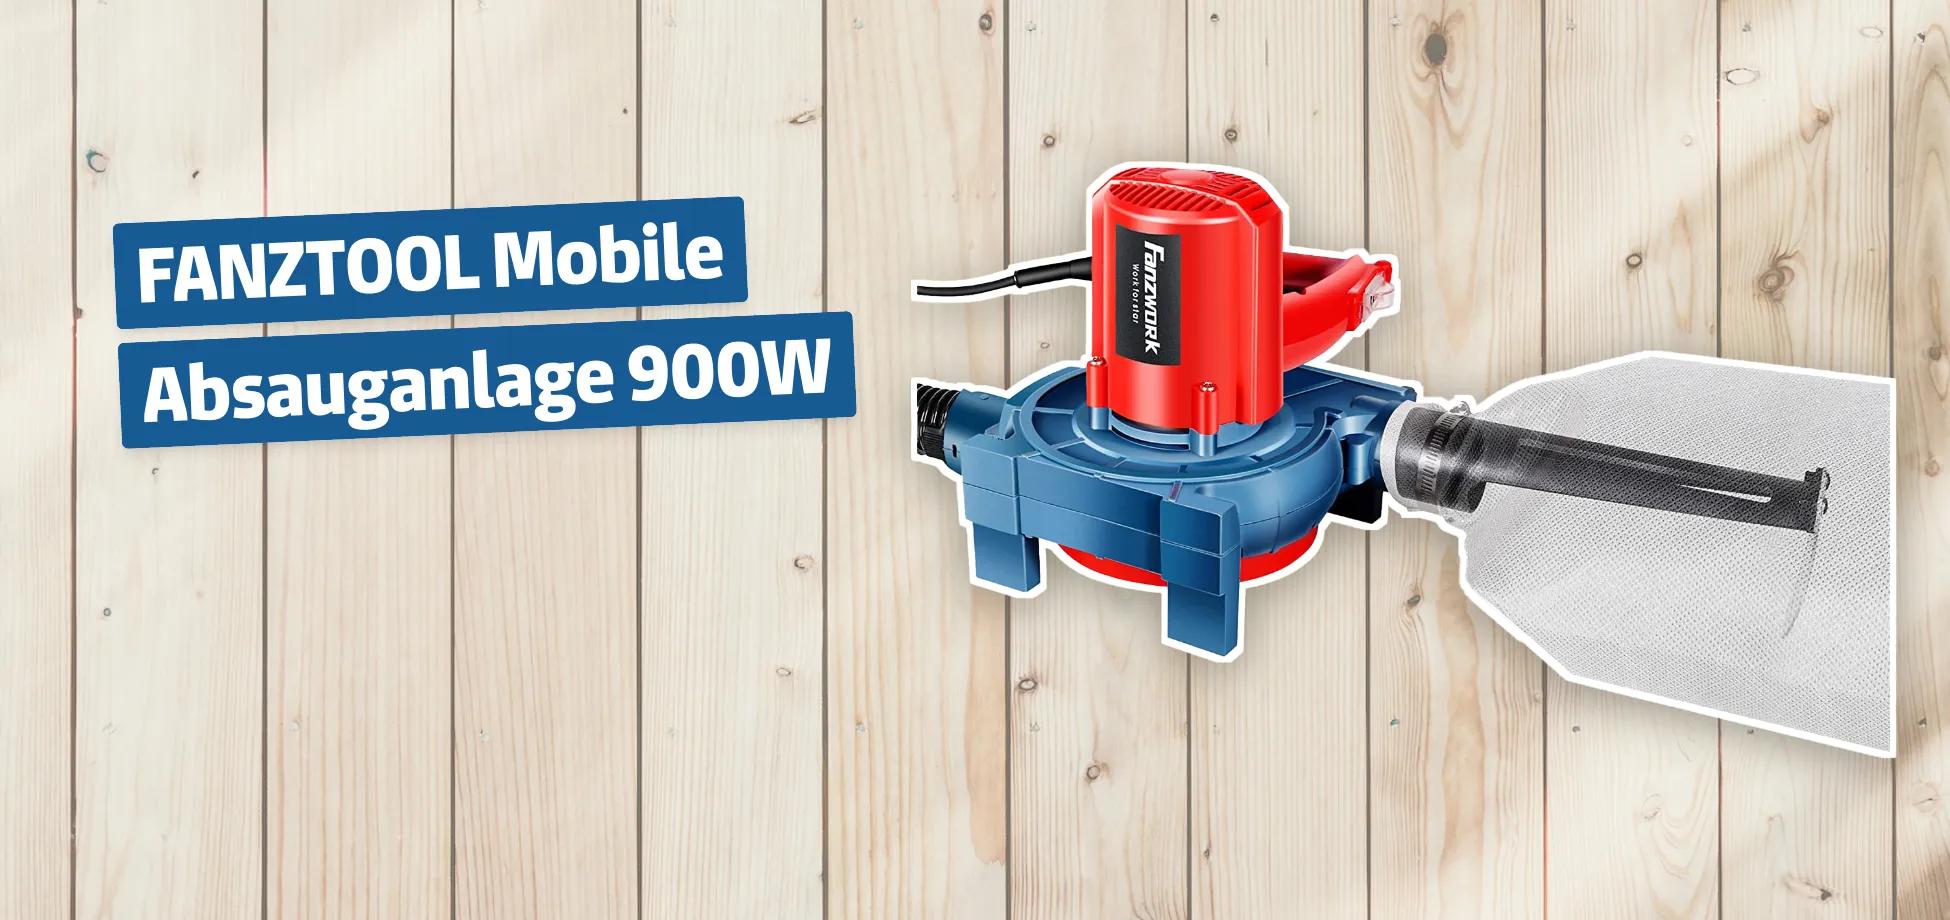 FANZTOOL Mobile Absauganlage 900W